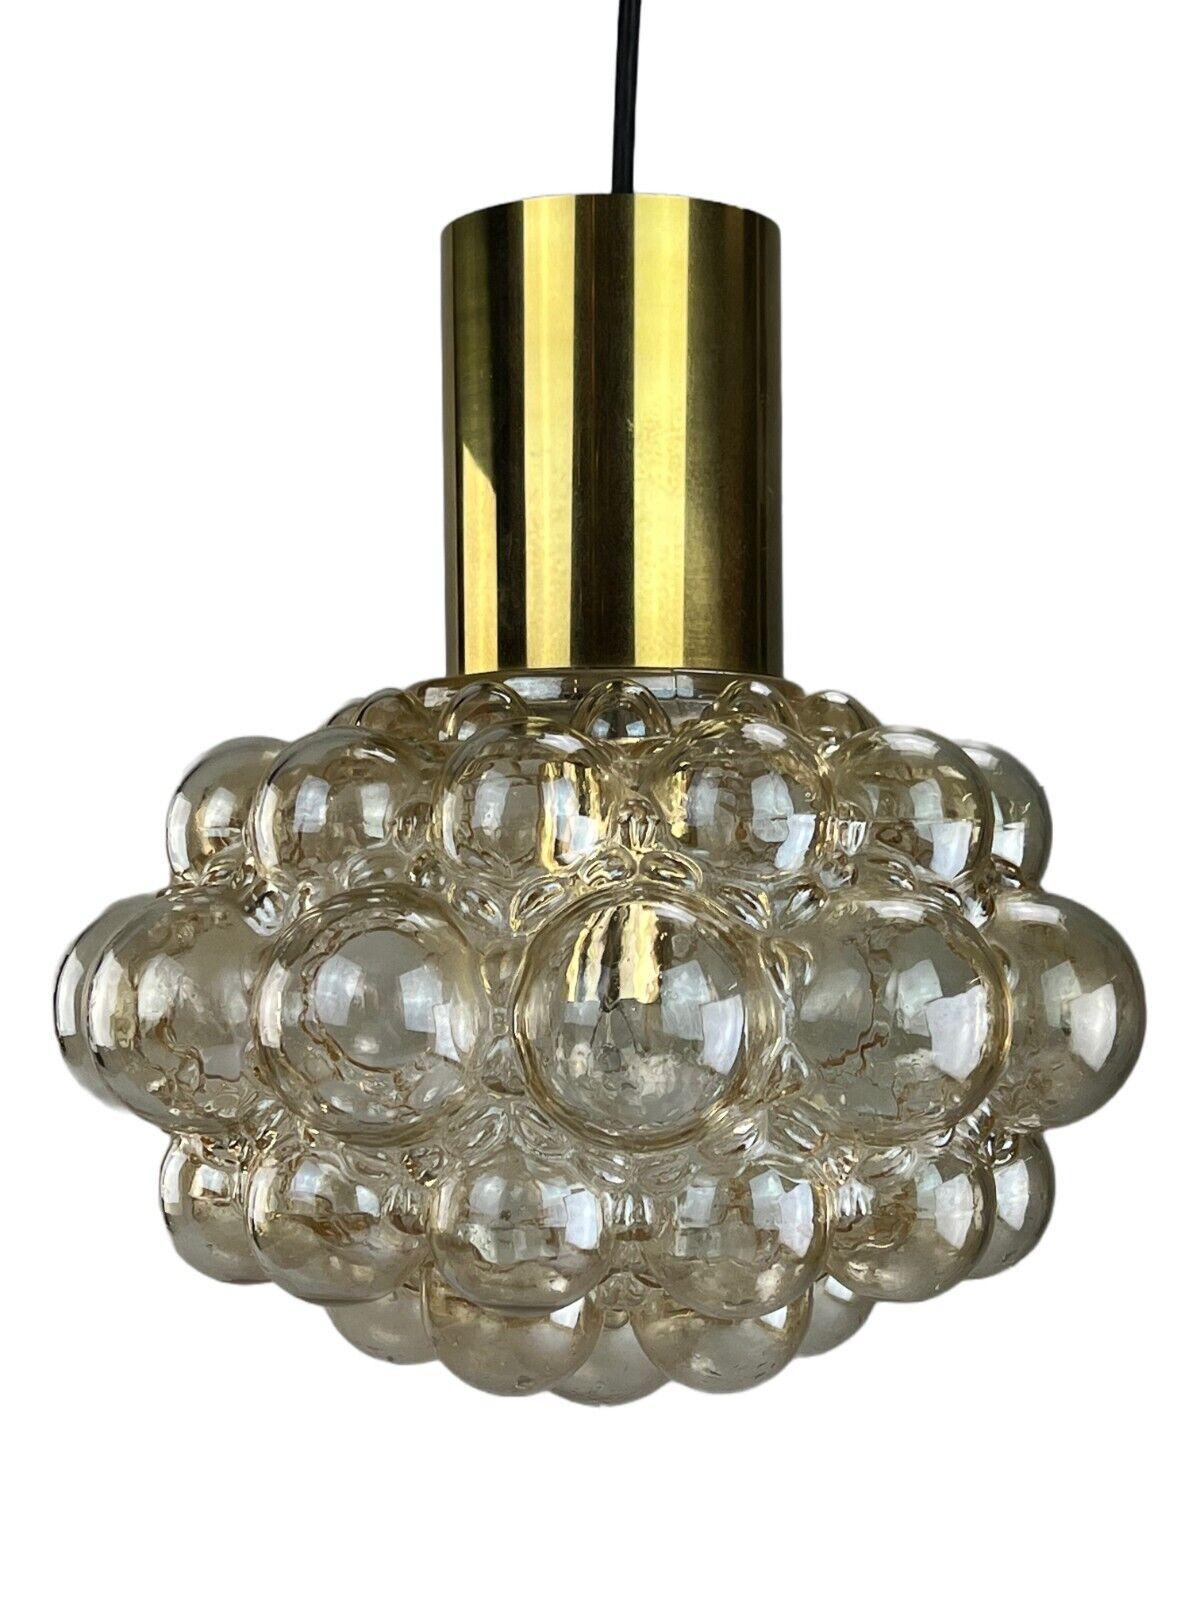 1960s 1970s lamp light ceiling lamp Helena Tynell glashütte limburg bubble.

Object: Ceiling lamp
Manufacturer: Helena Tynell, Limburg
Condition: Good
Age: Around 1960-1970
Dimensions:
Diameter = 33cm
Height = 33cm
Other notes:
E27 socket
The